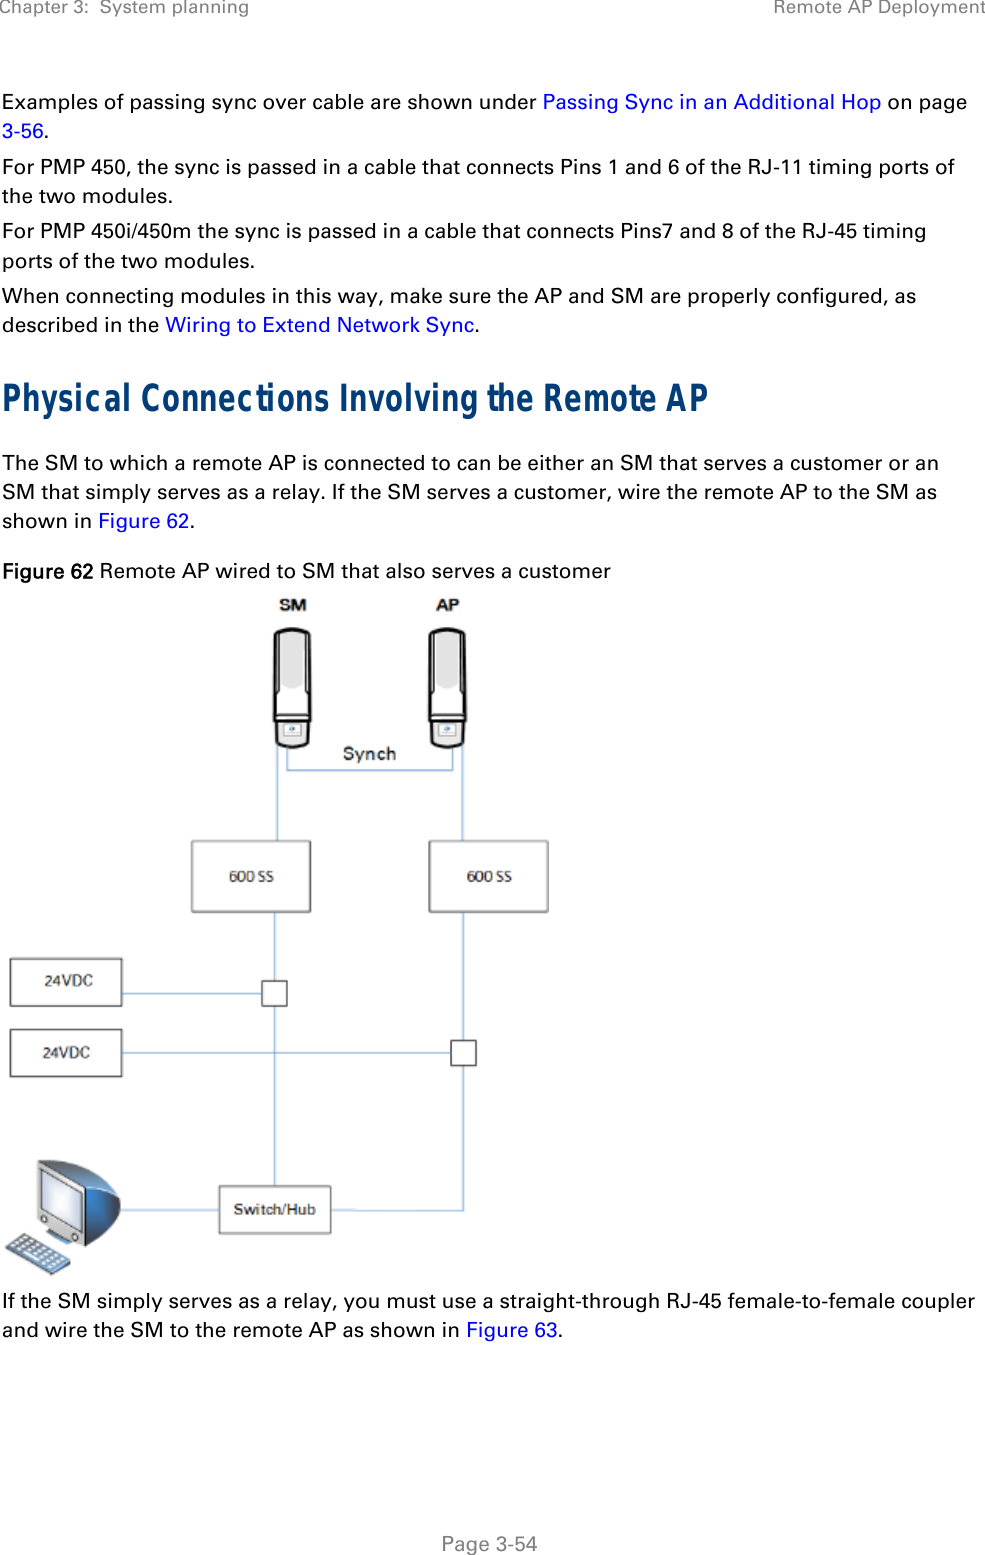 Chapter 3:  System planning  Remote AP Deployment   Page 3-54 Examples of passing sync over cable are shown under Passing Sync in an Additional Hop on page 3-56.  For PMP 450, the sync is passed in a cable that connects Pins 1 and 6 of the RJ-11 timing ports of the two modules.  For PMP 450i/450m the sync is passed in a cable that connects Pins7 and 8 of the RJ-45 timing ports of the two modules. When connecting modules in this way, make sure the AP and SM are properly configured, as described in the Wiring to Extend Network Sync. Physical Connections Involving the Remote AP The SM to which a remote AP is connected to can be either an SM that serves a customer or an SM that simply serves as a relay. If the SM serves a customer, wire the remote AP to the SM as shown in Figure 62. Figure 62 Remote AP wired to SM that also serves a customer  If the SM simply serves as a relay, you must use a straight-through RJ-45 female-to-female coupler and wire the SM to the remote AP as shown in Figure 63. 